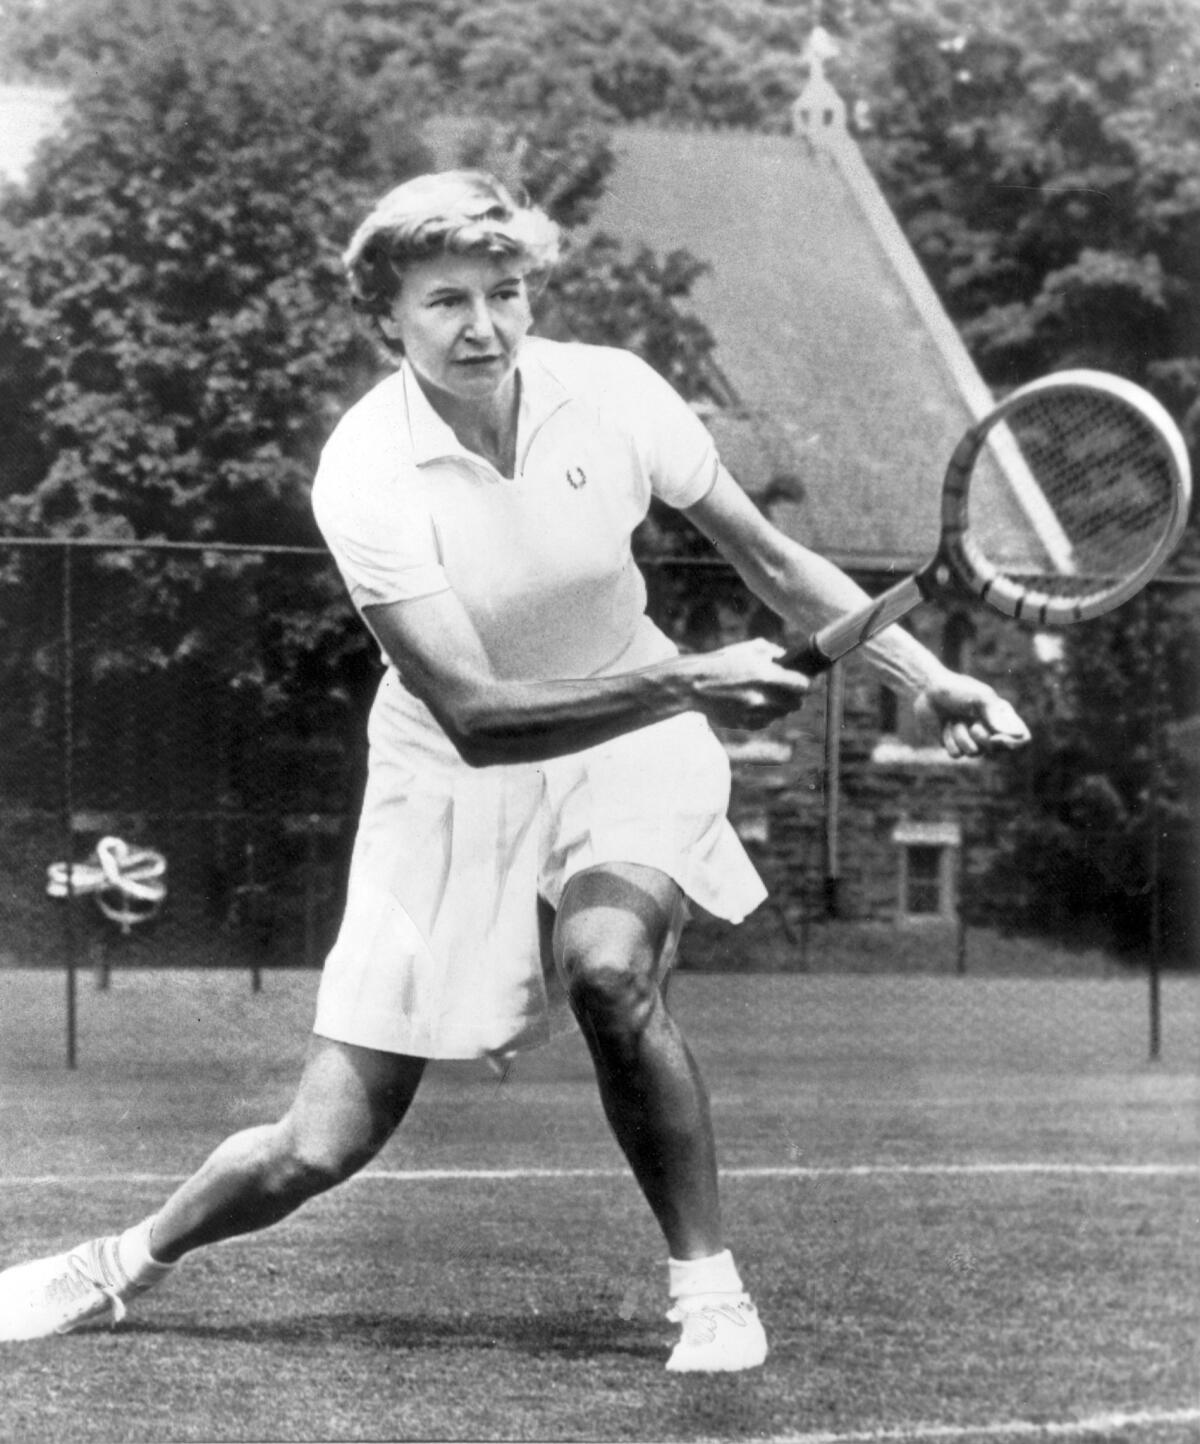 Tennis champion Louise Brough playing in tournament in Philadelphia in 1955.